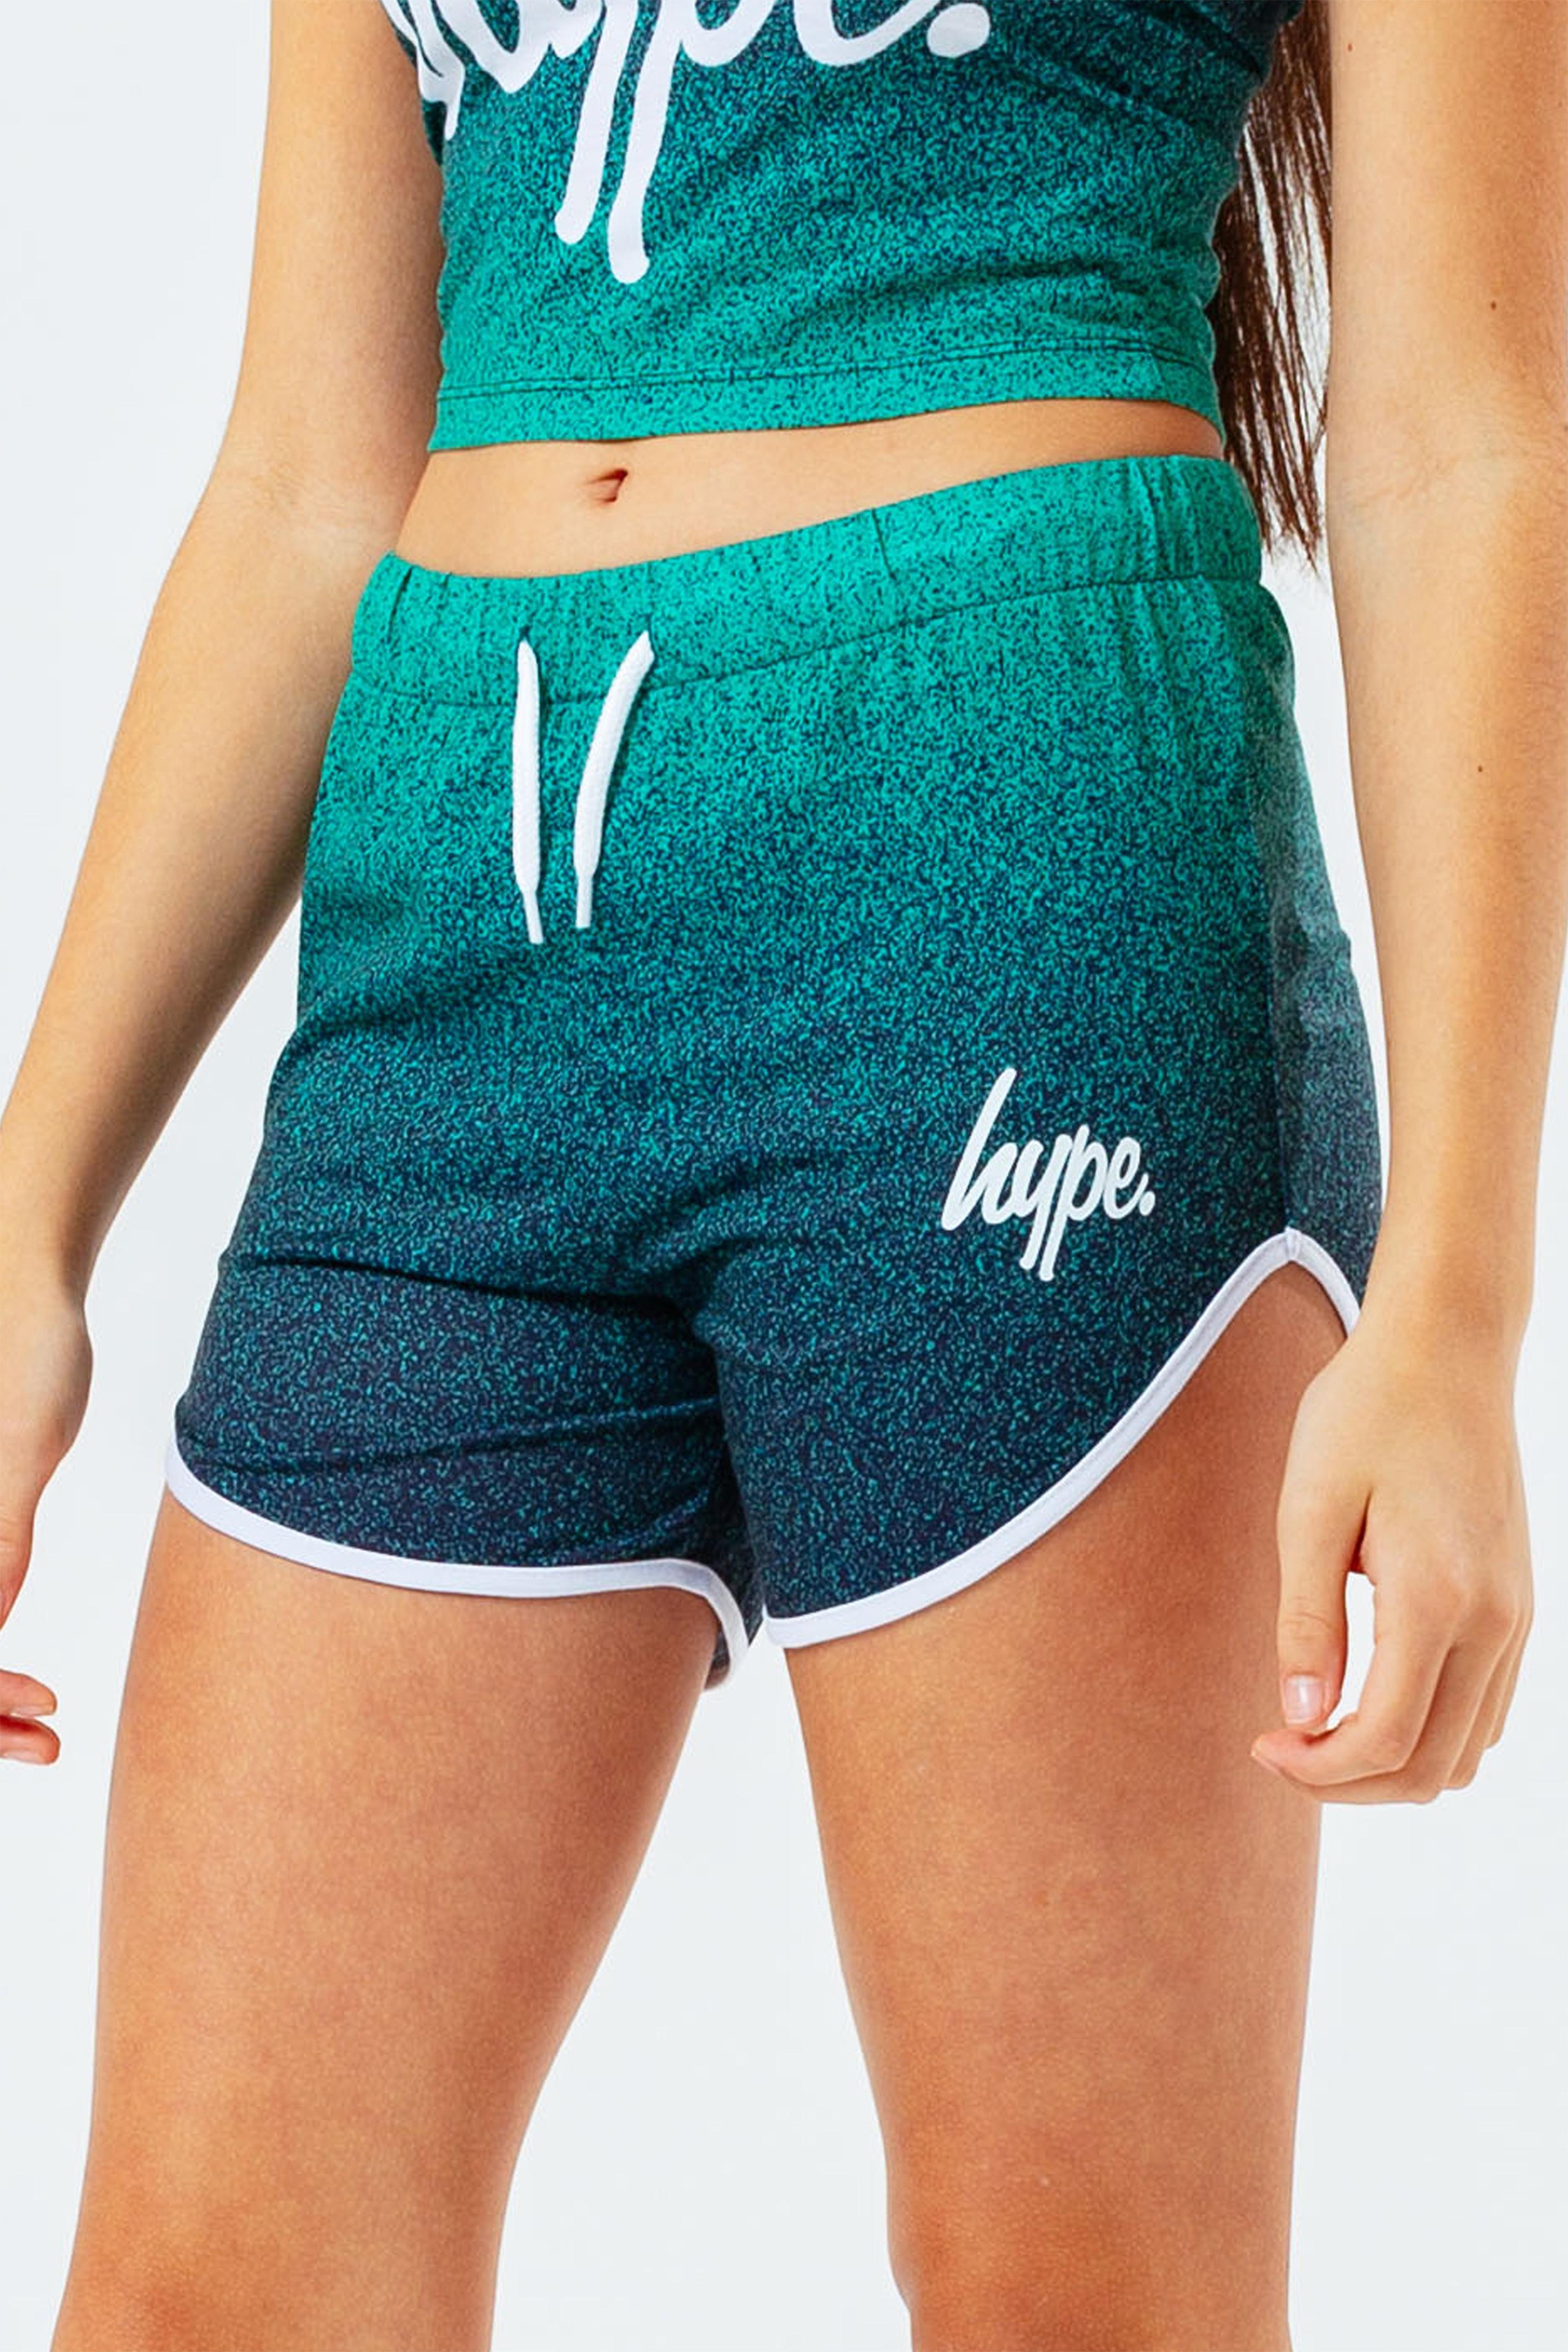 HYPE TEAL SPECKLE FADE GIRLS RUNNING SHORTS